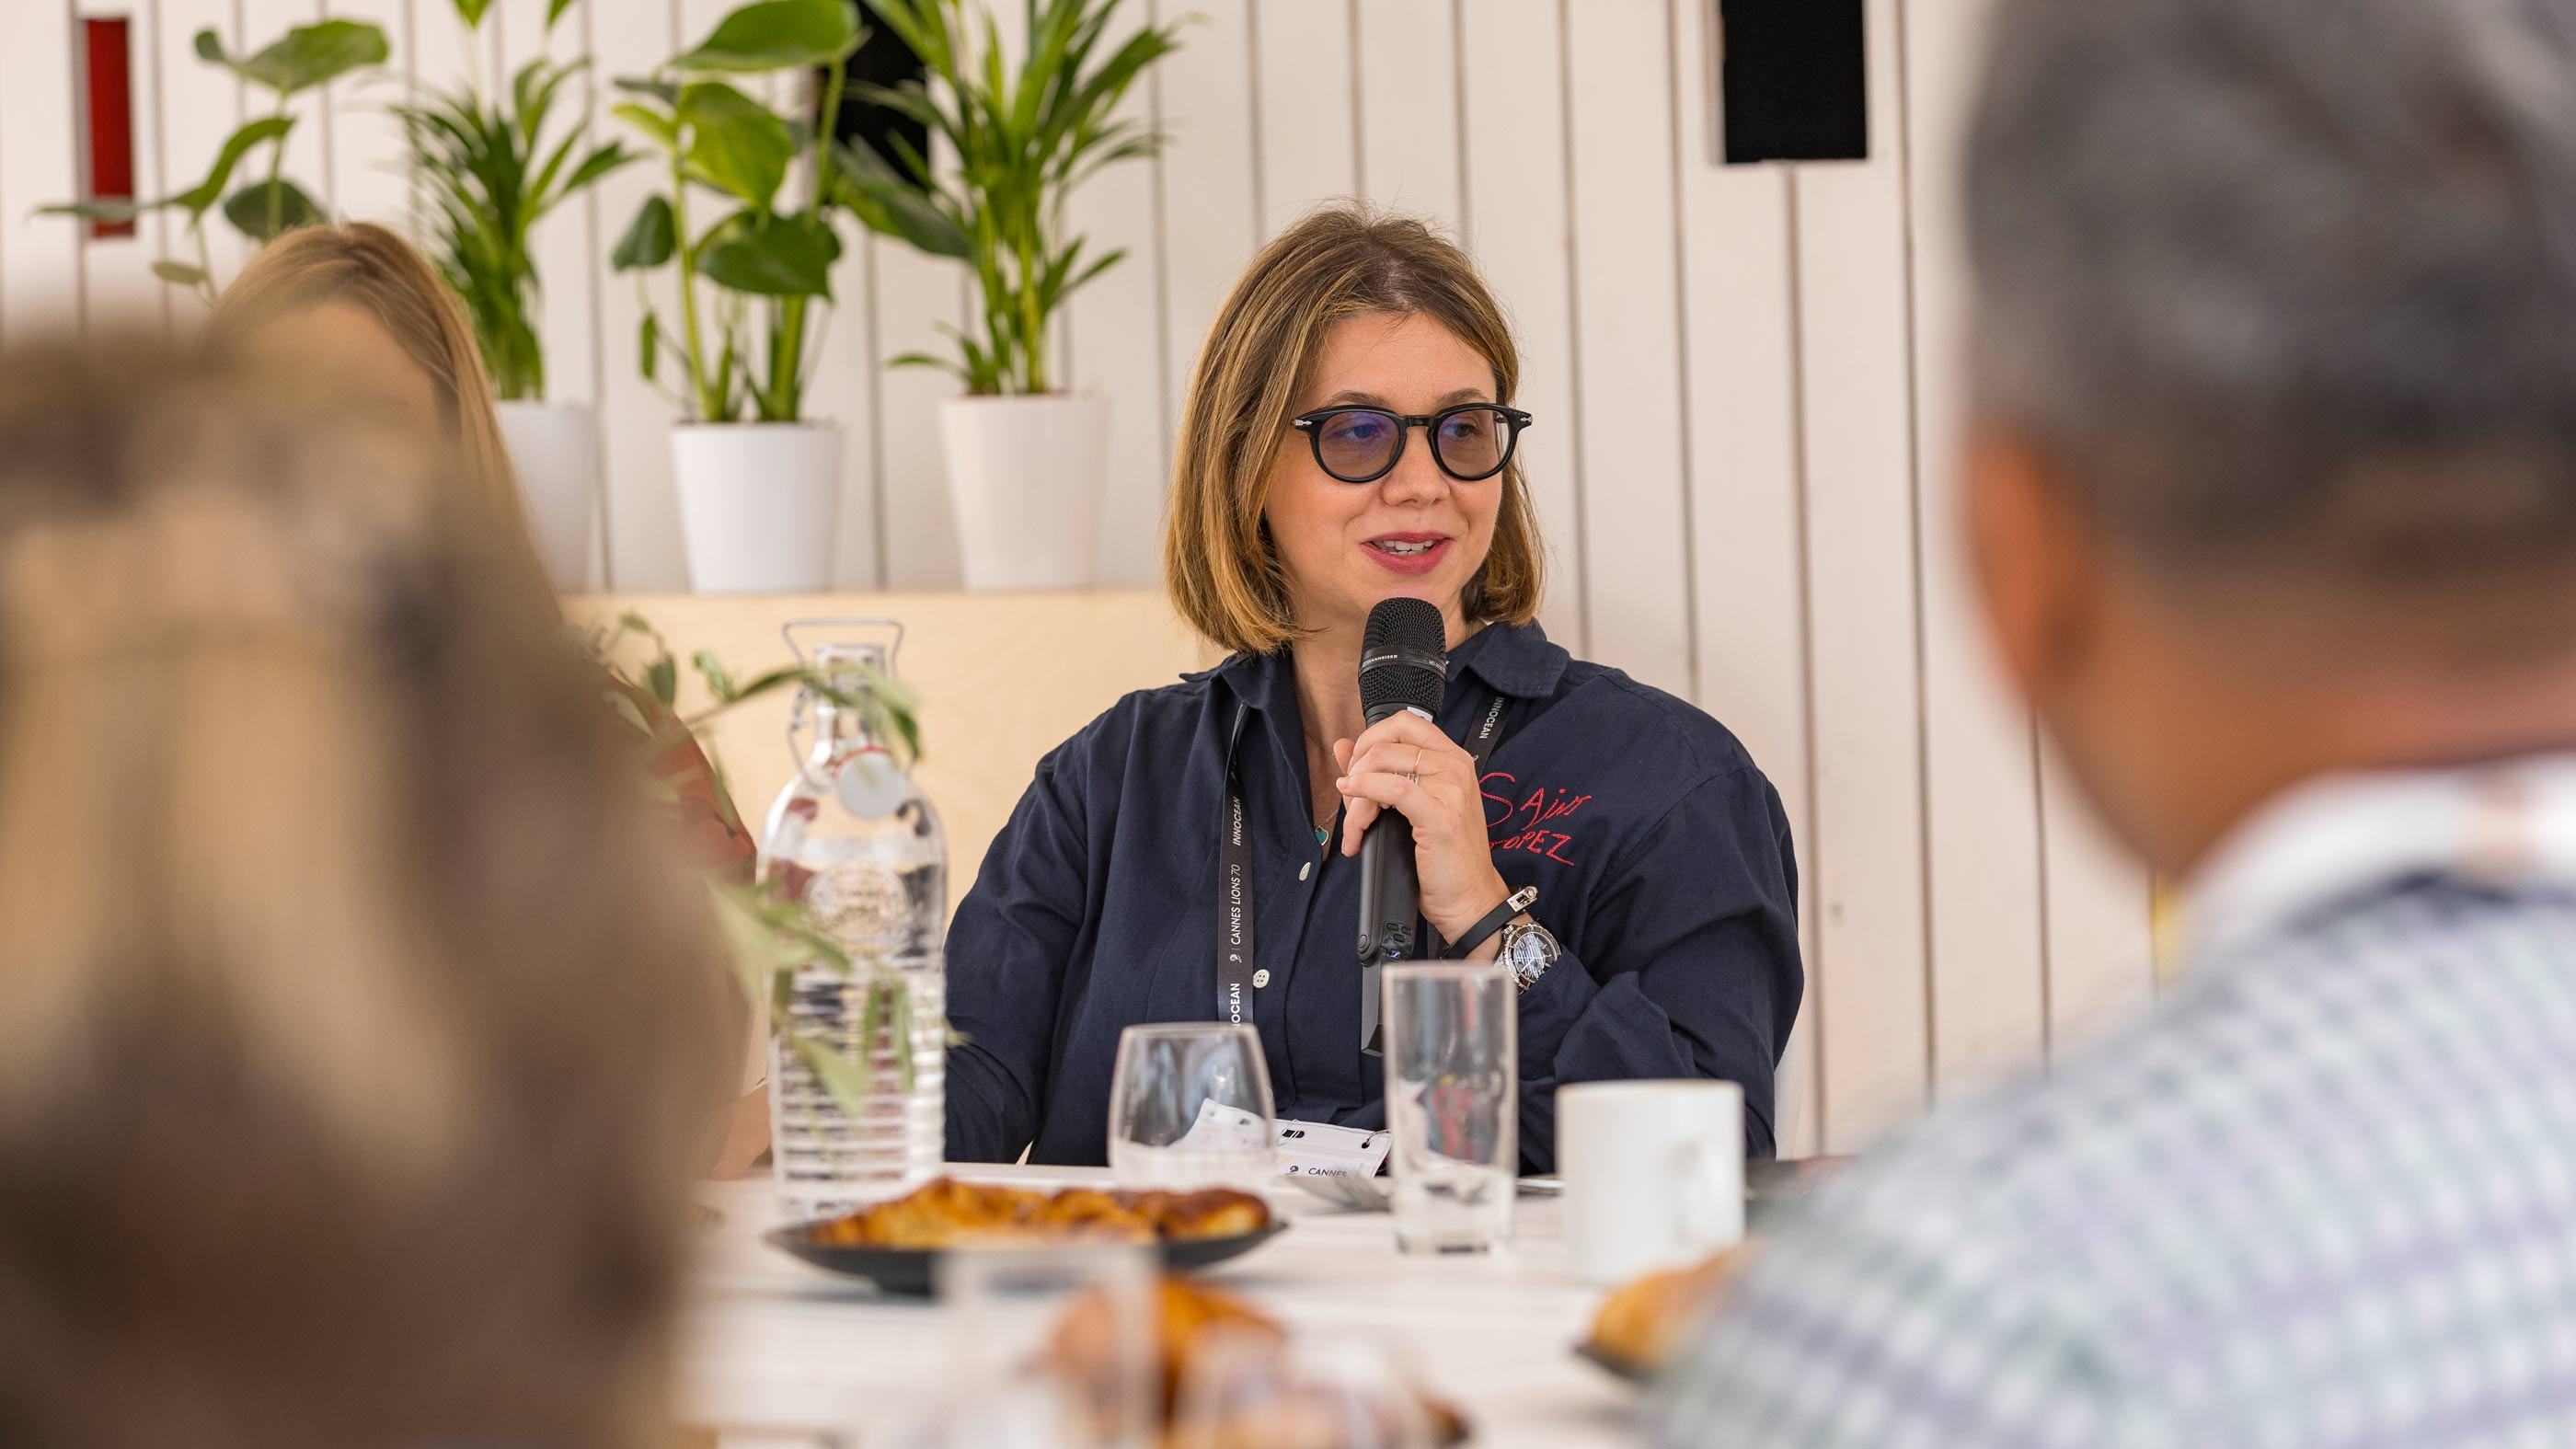 Marie Gulin-Merle, global VP of ads marketing at Google, wears sunglasses and a casual black jacket while speaking at a round-table discussion about AI in marketing at the Google Beach during the Cannes Lions International Festival of Creativity.